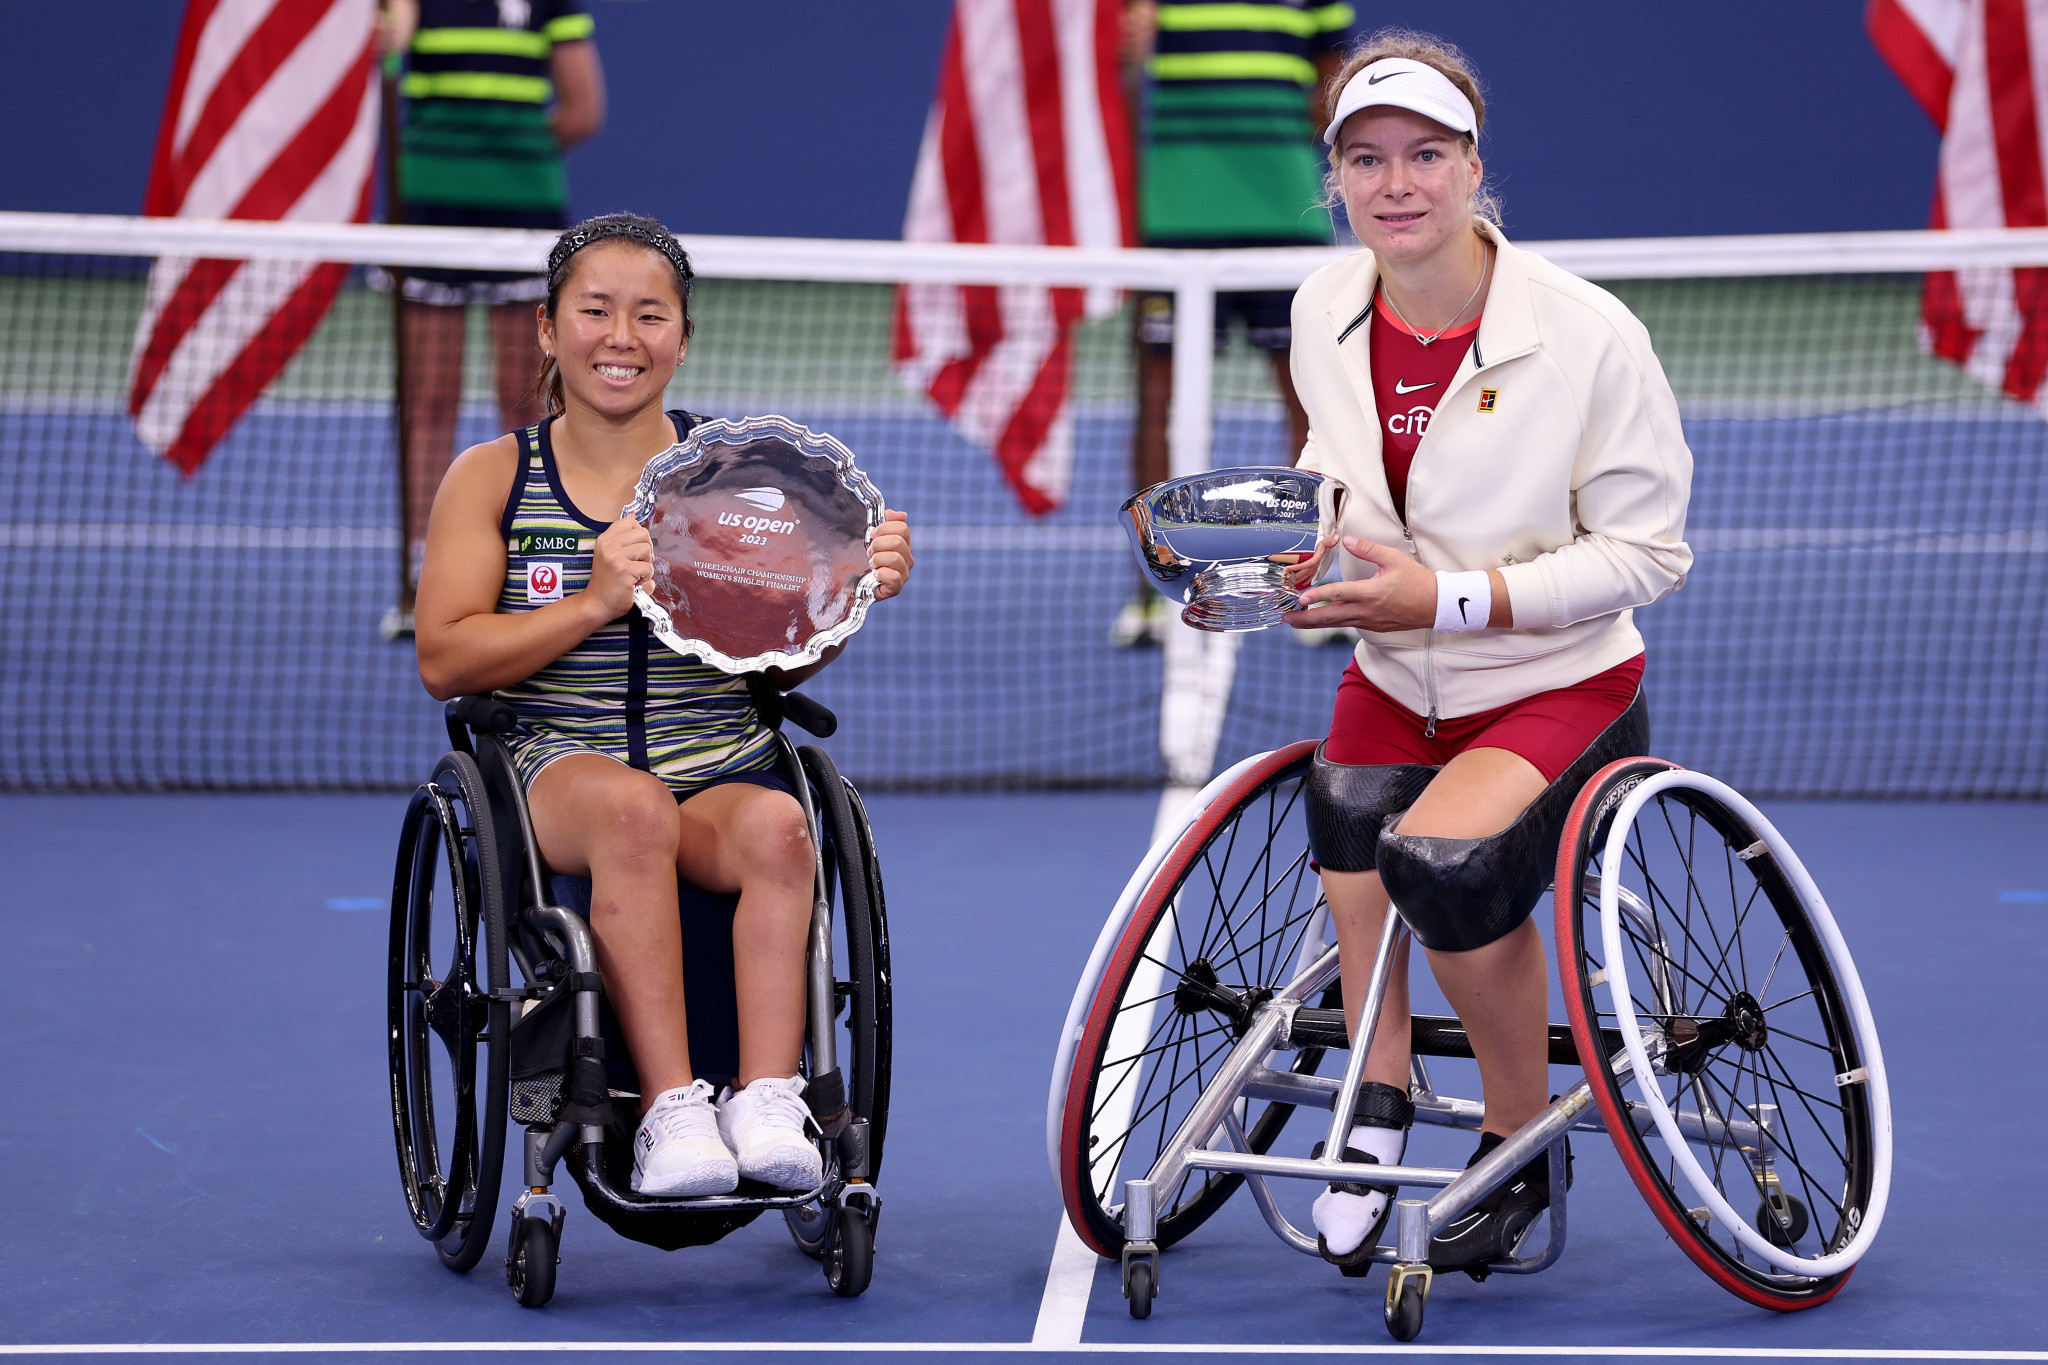 Diede de Groot of The Netherlands, right, won her sixth consecutive US Open singles title in a row ©Getty Images